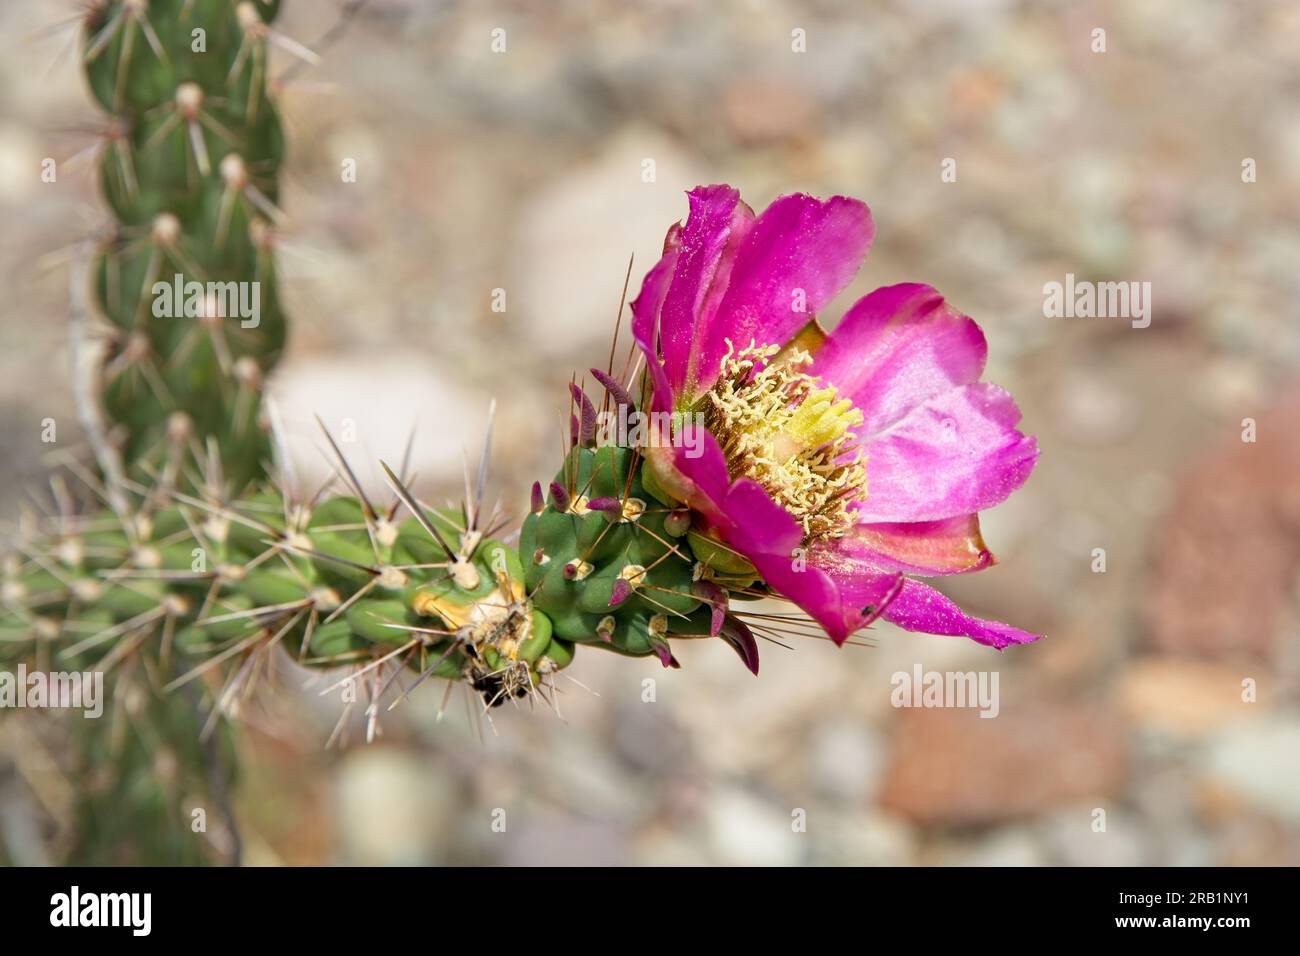 Close-up cane cholla cactus (Cylindropuntia imbricata) magenta bloom in Chihuahuan desert. Stock Photo